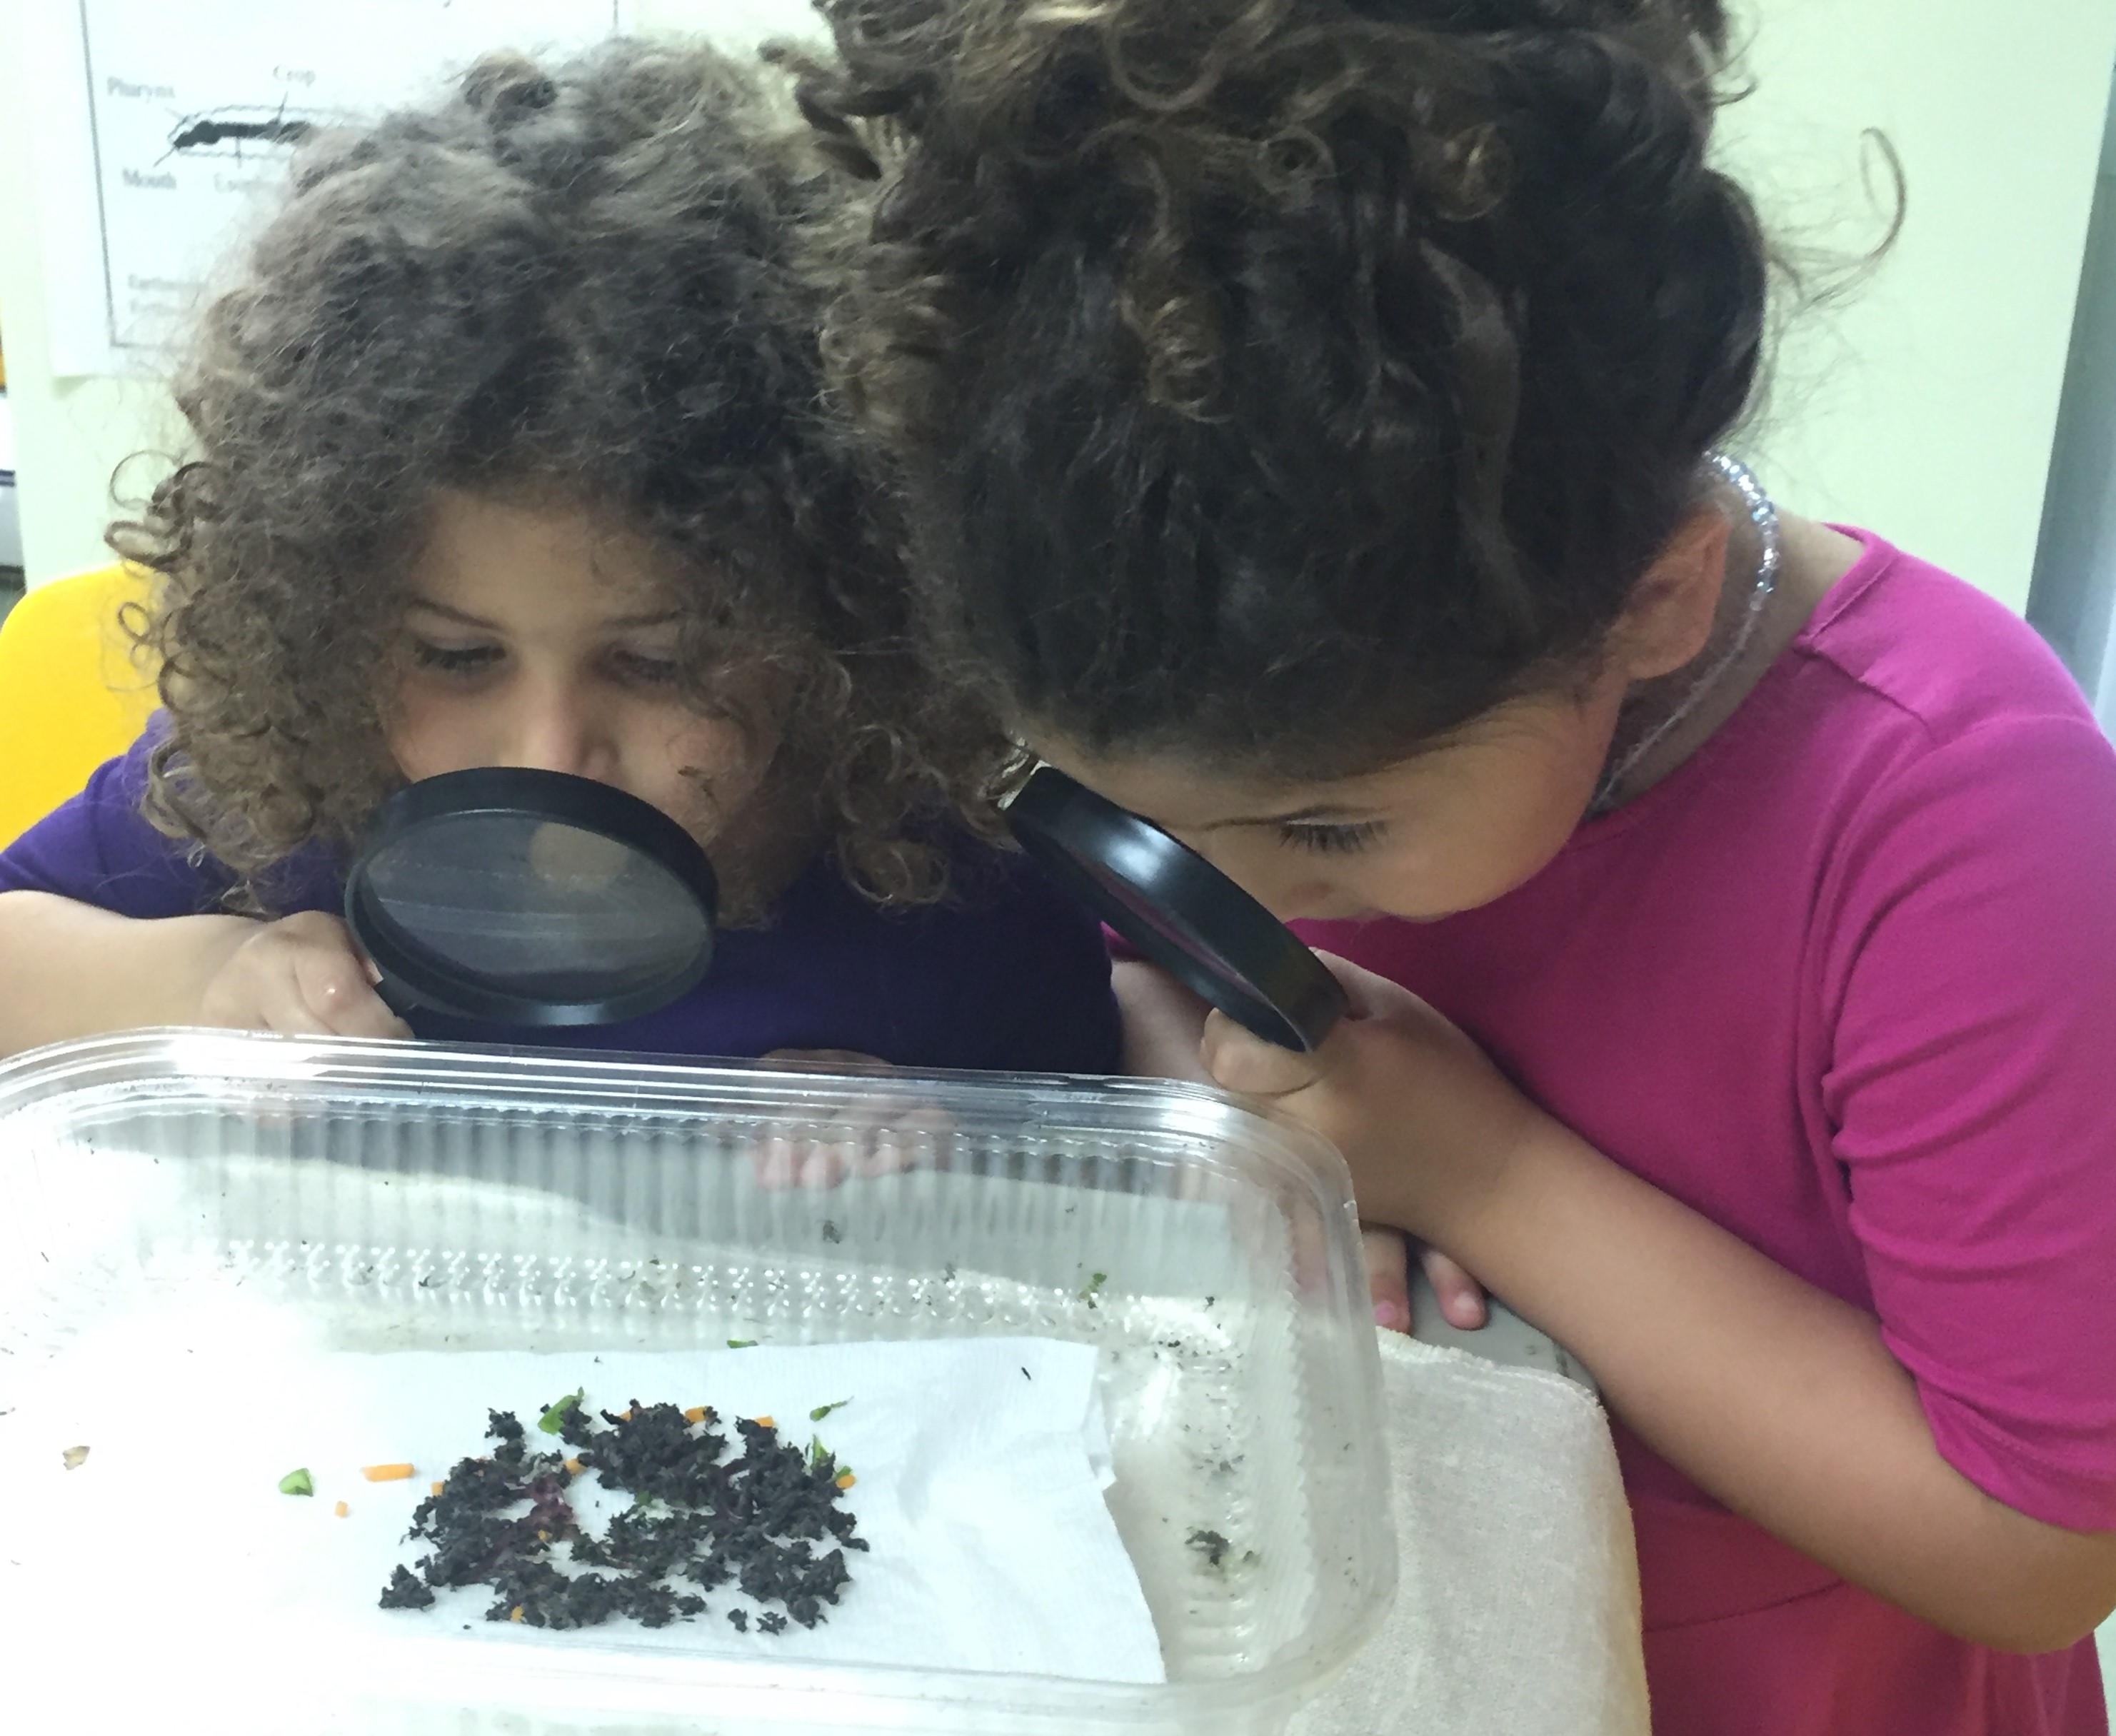 Two young girls use magnifying glasses to look for worms in the dirt.